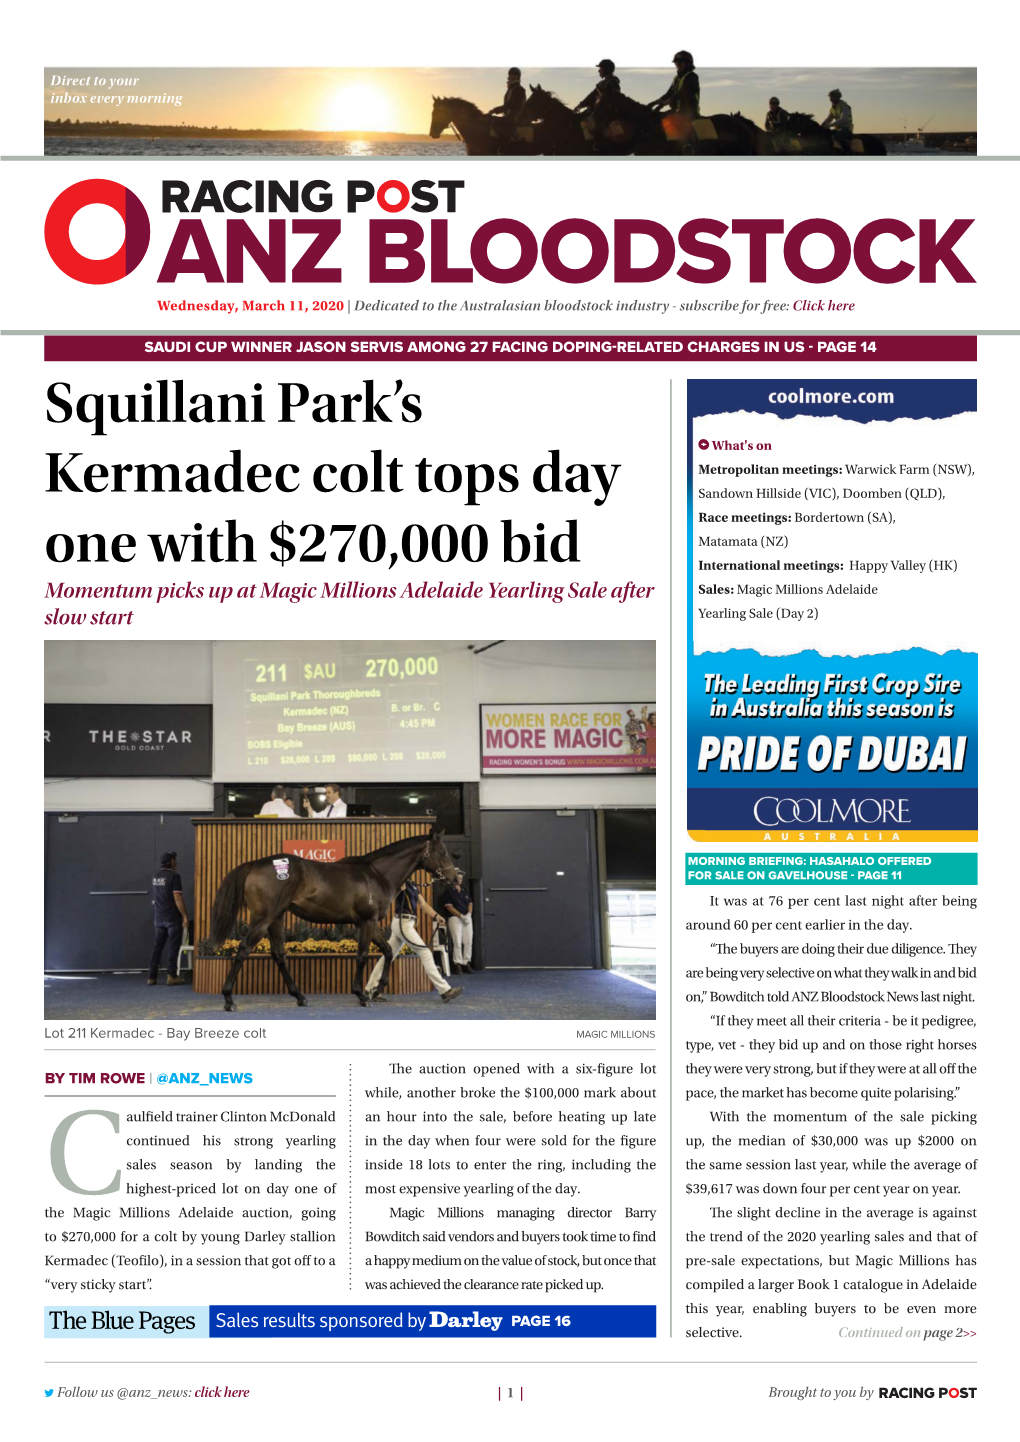 Squillani Park's Kermadec Colt Tops Day One with $270,000